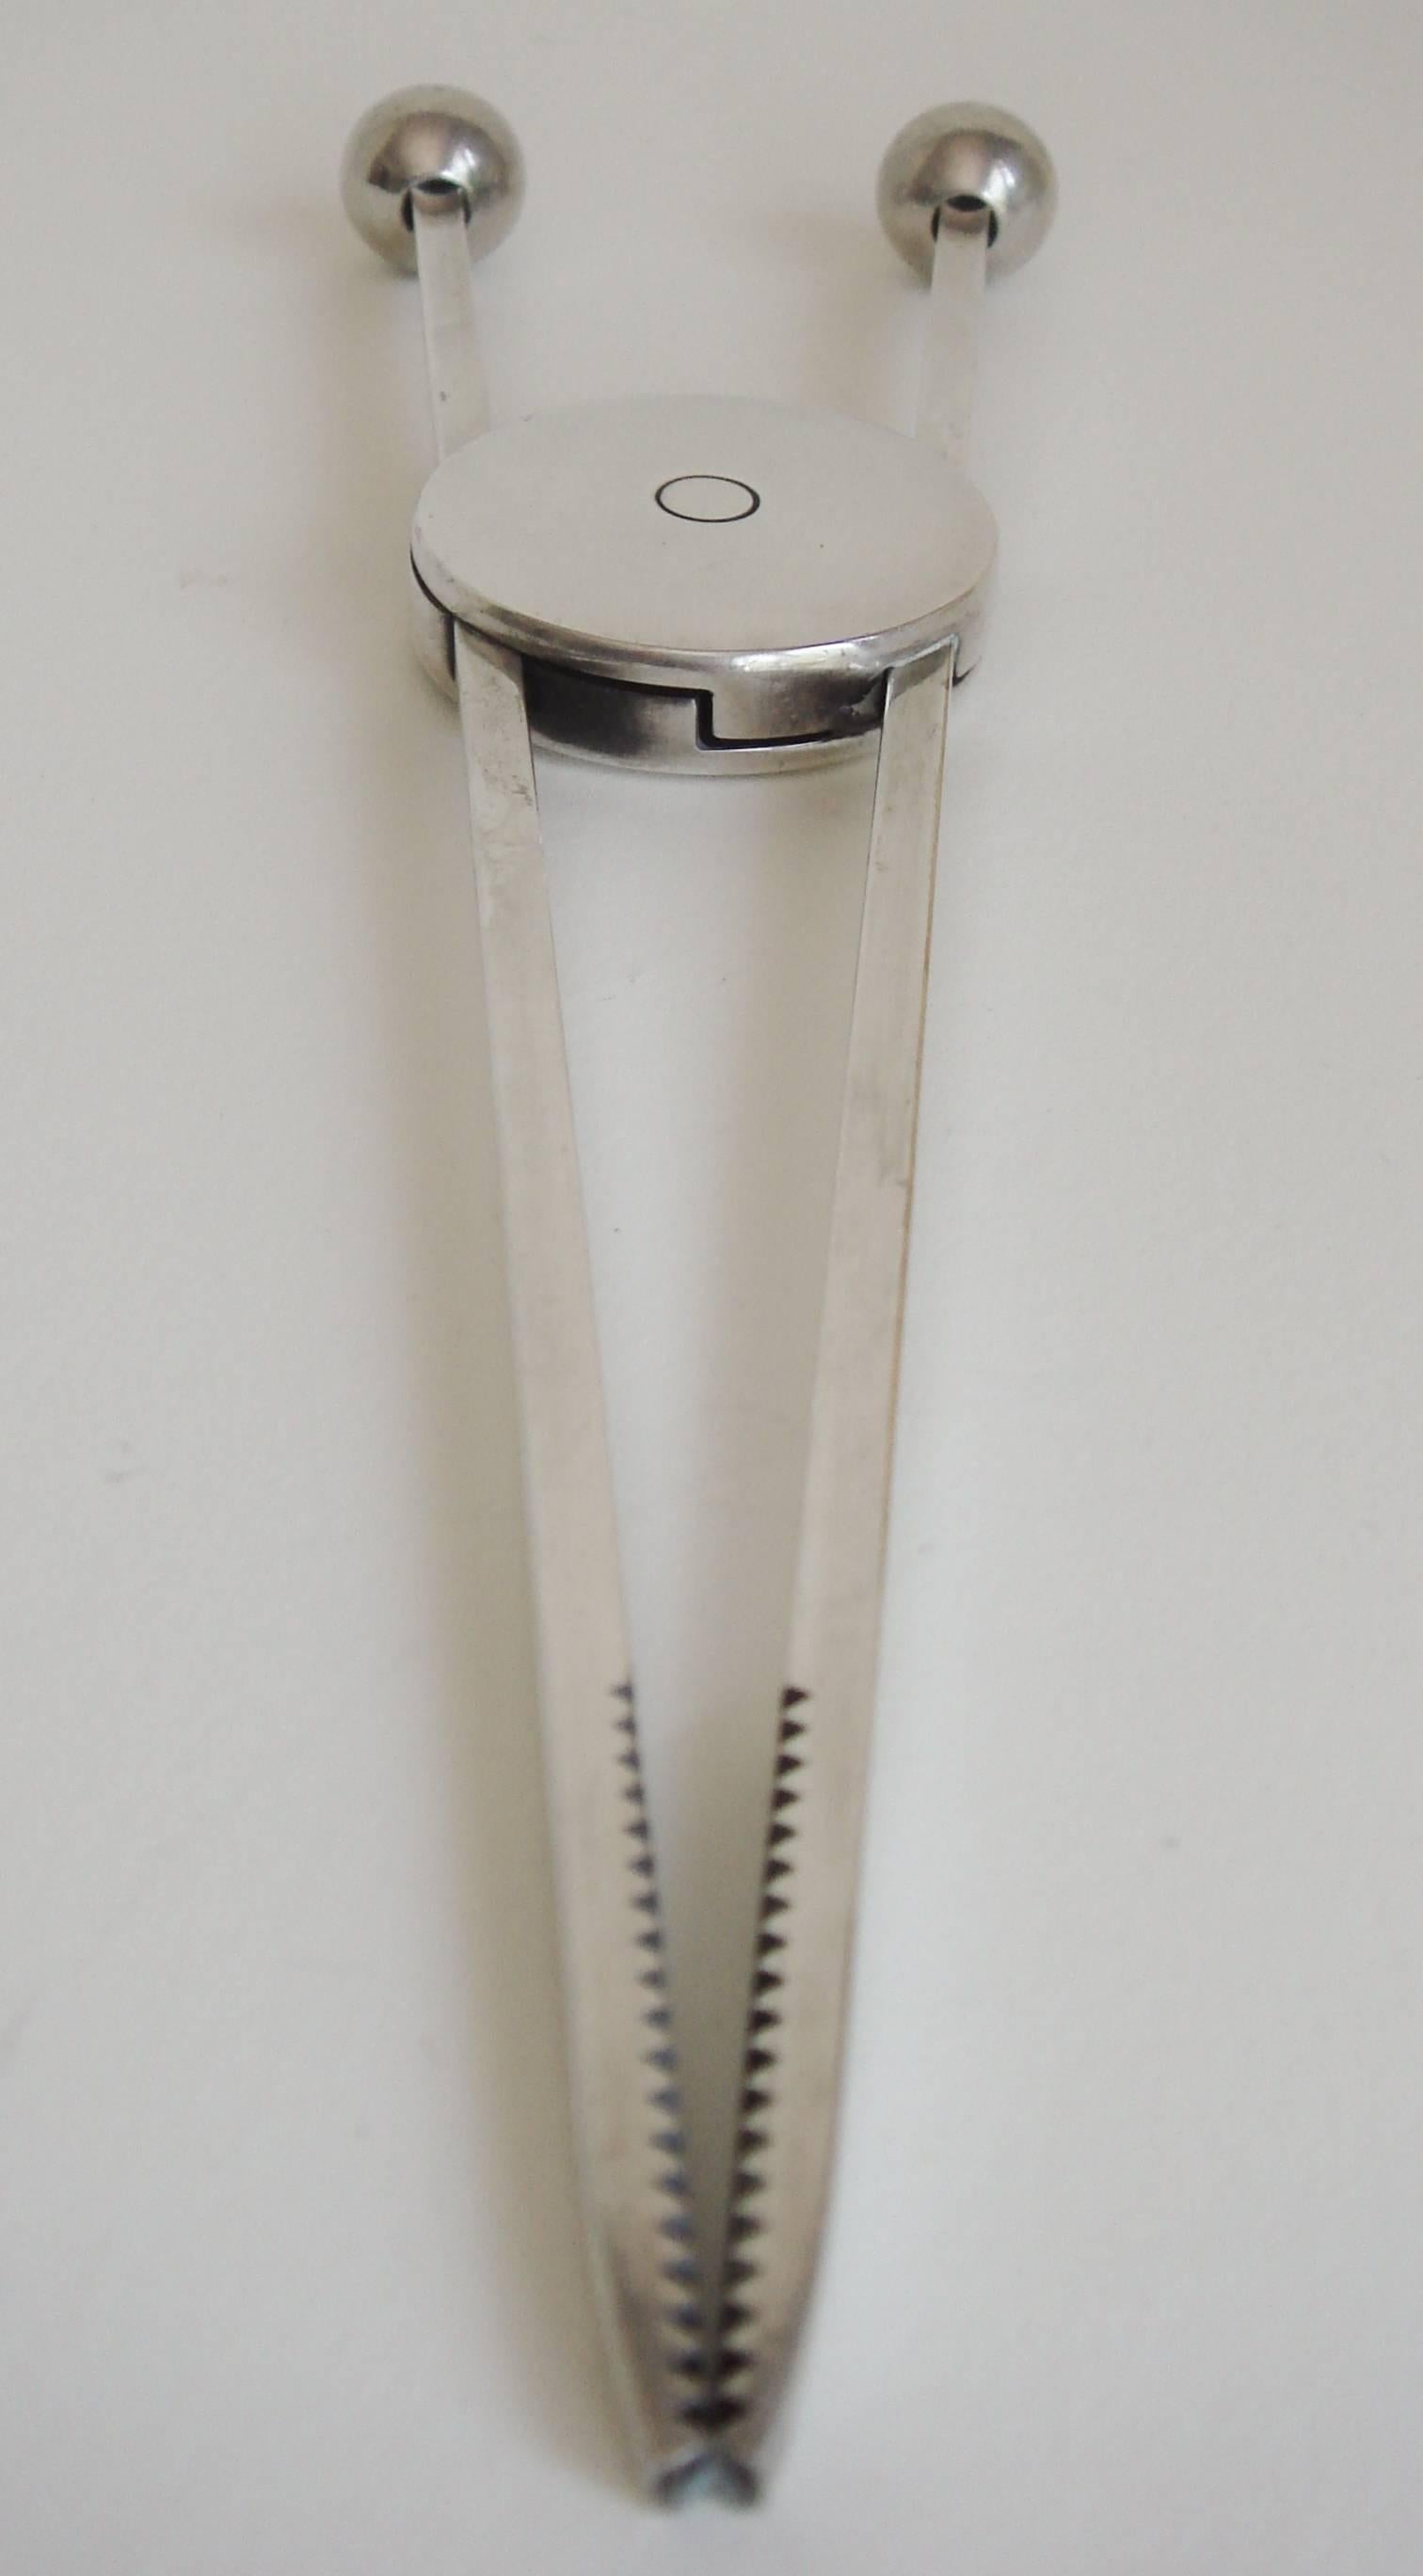 This beautifully designed pair of Mid-Century Modern, silver plated and sprung ice tongs is the work of the fabled French designer, Jacques Adnet. The disc shaped center portion houses a spring mechanism while the arms are each topped at one end